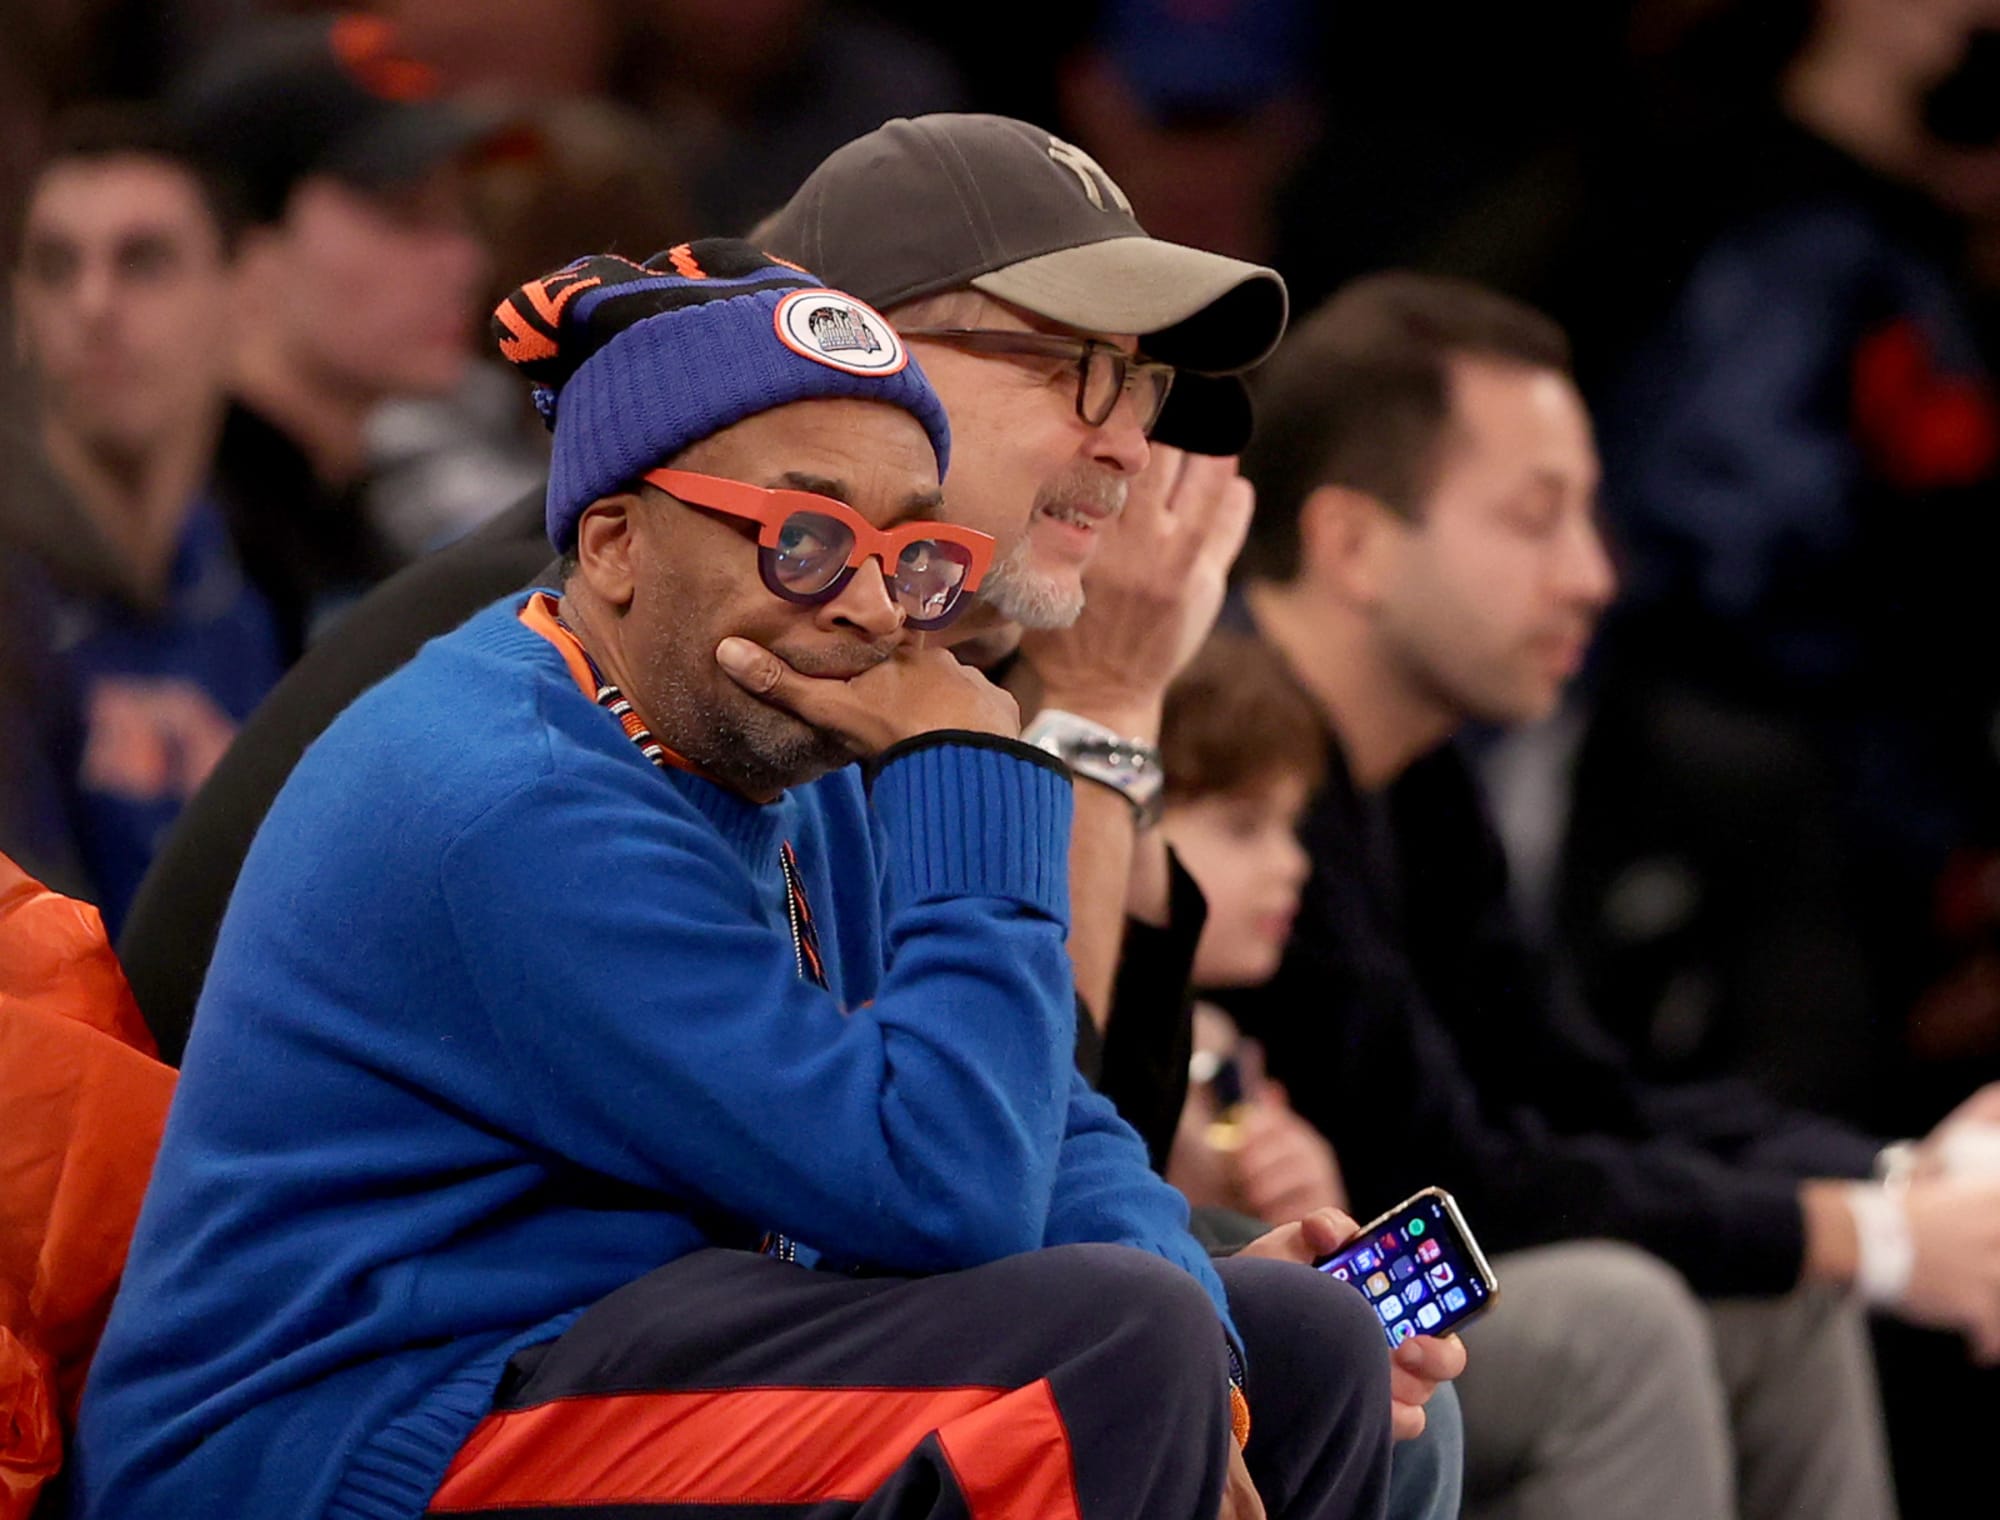 Why Did the New York Knicks Decide to Take On Spike Lee?